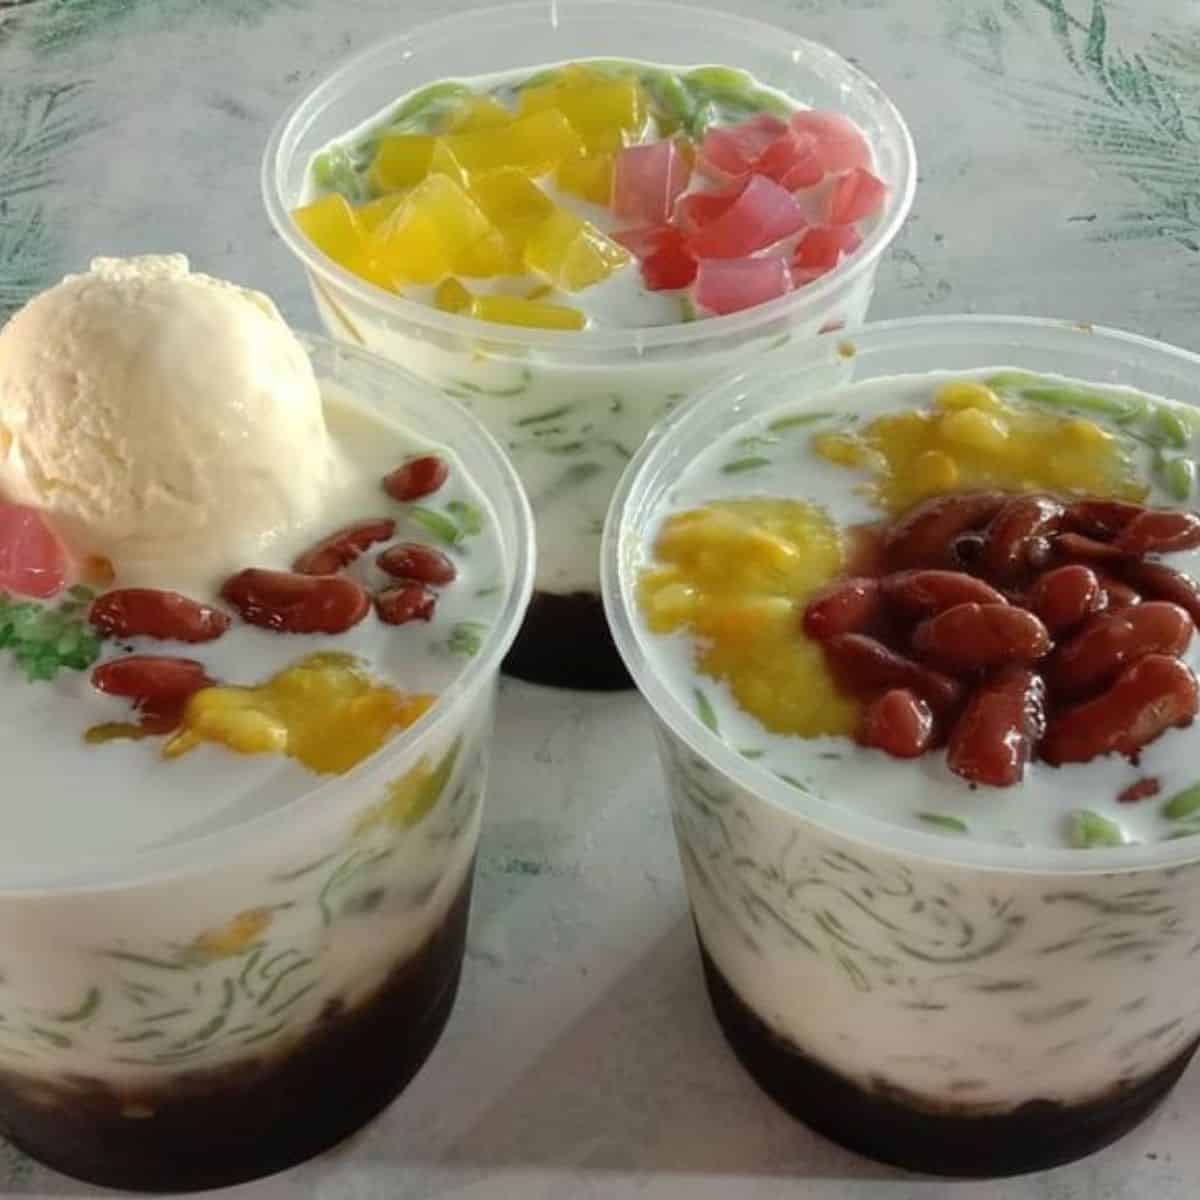 Three different versions of Malaysian delectable dessert from Casa Prima placed in circular plastic cups